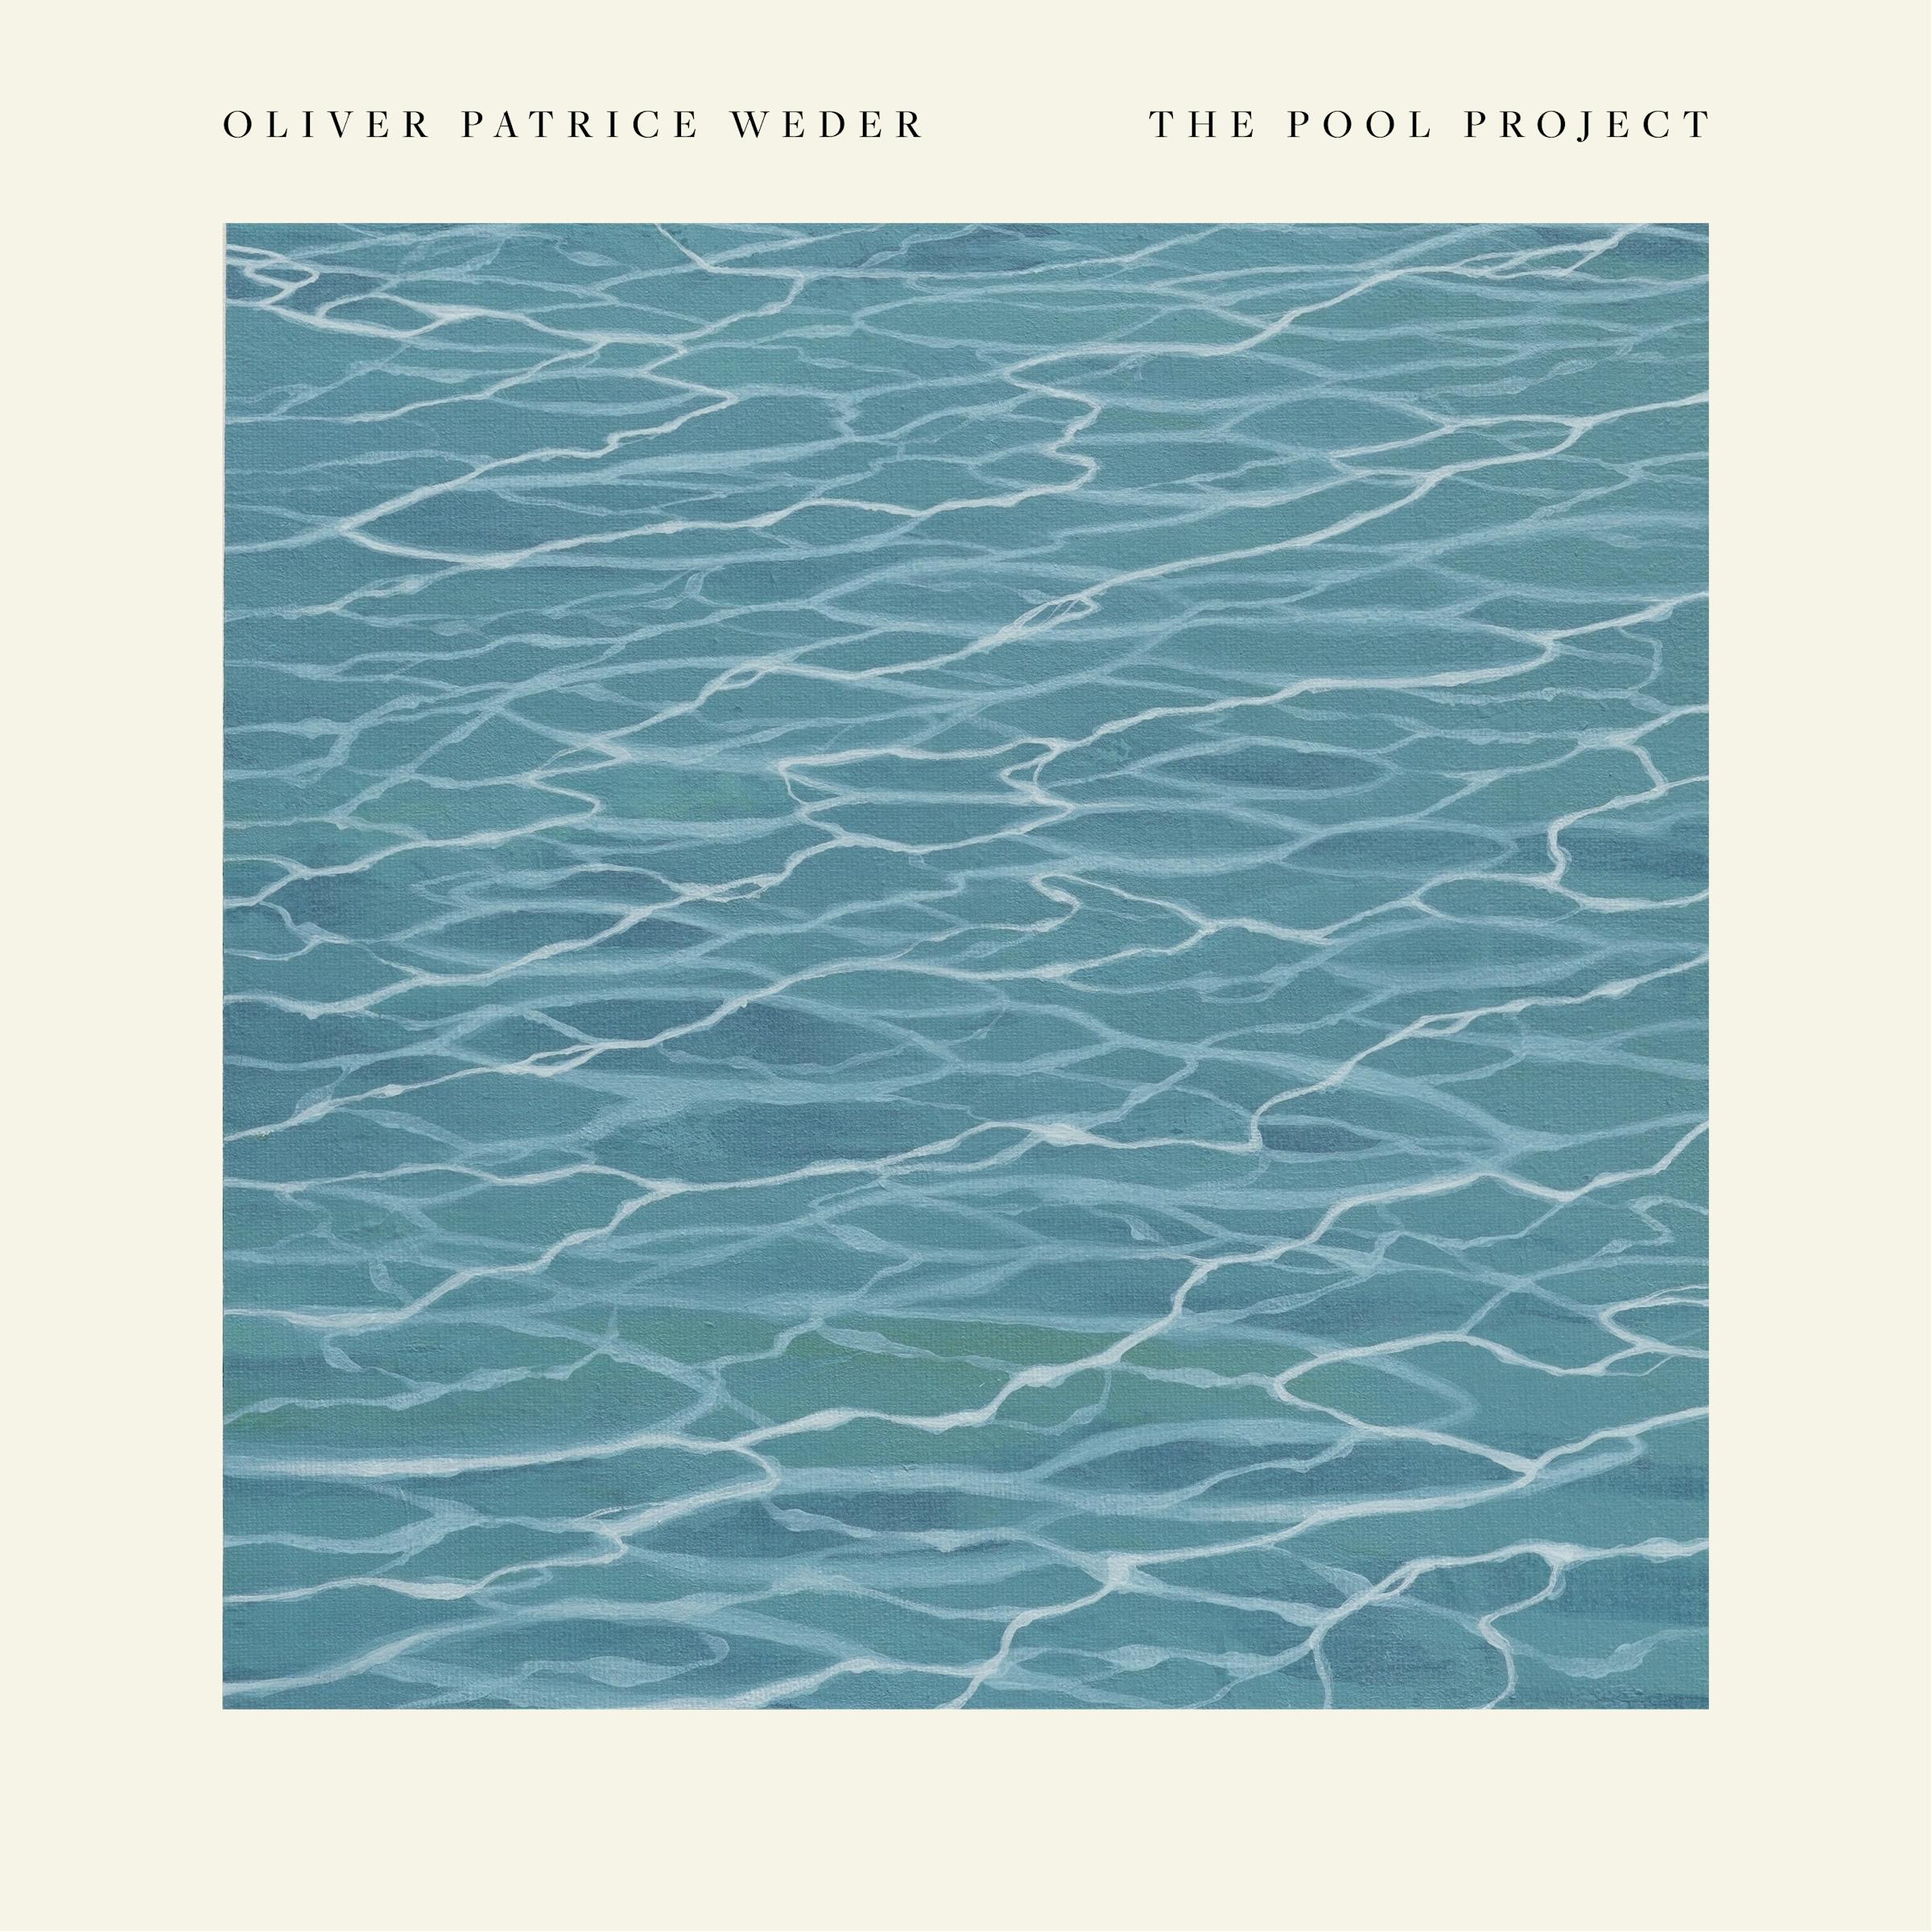 The Pool Project artwork